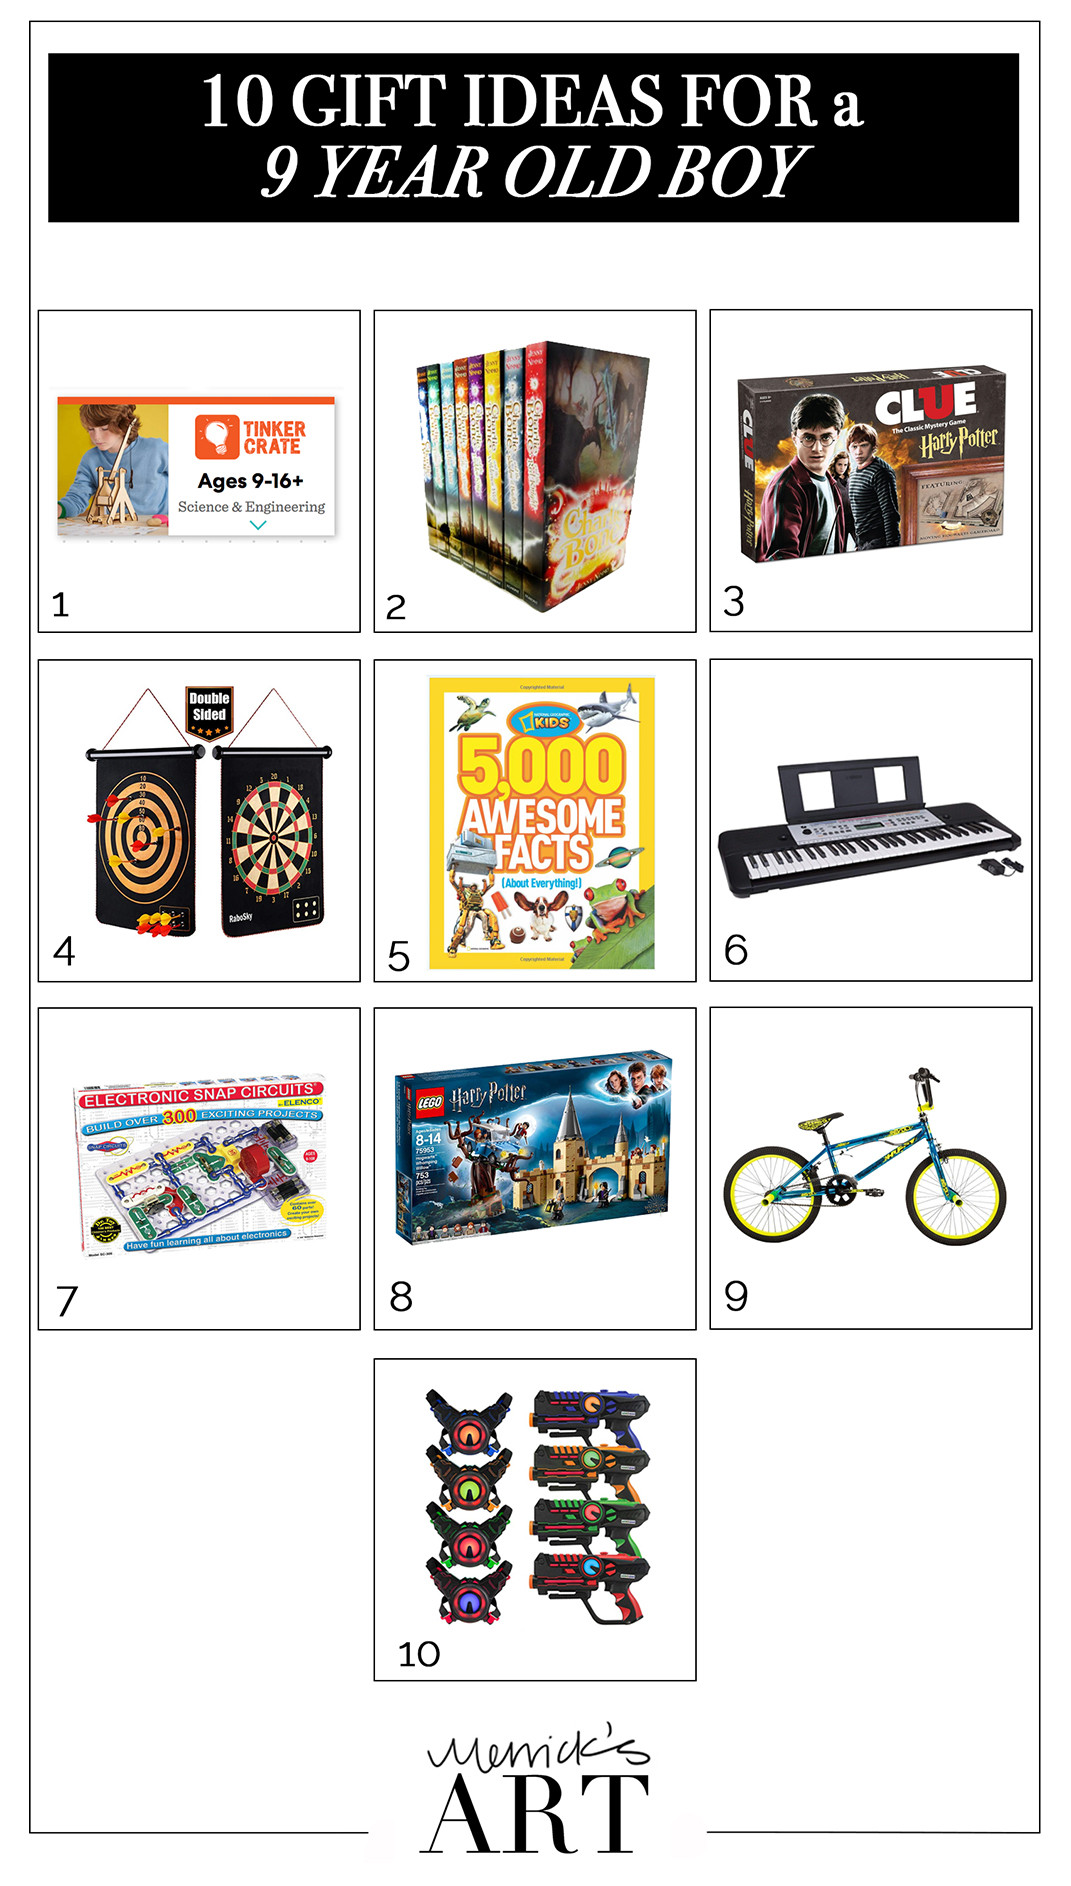 Gift Ideas For 9 Year Old Boys
 10 Awesome Gift Ideas for 9 Year Old Boys